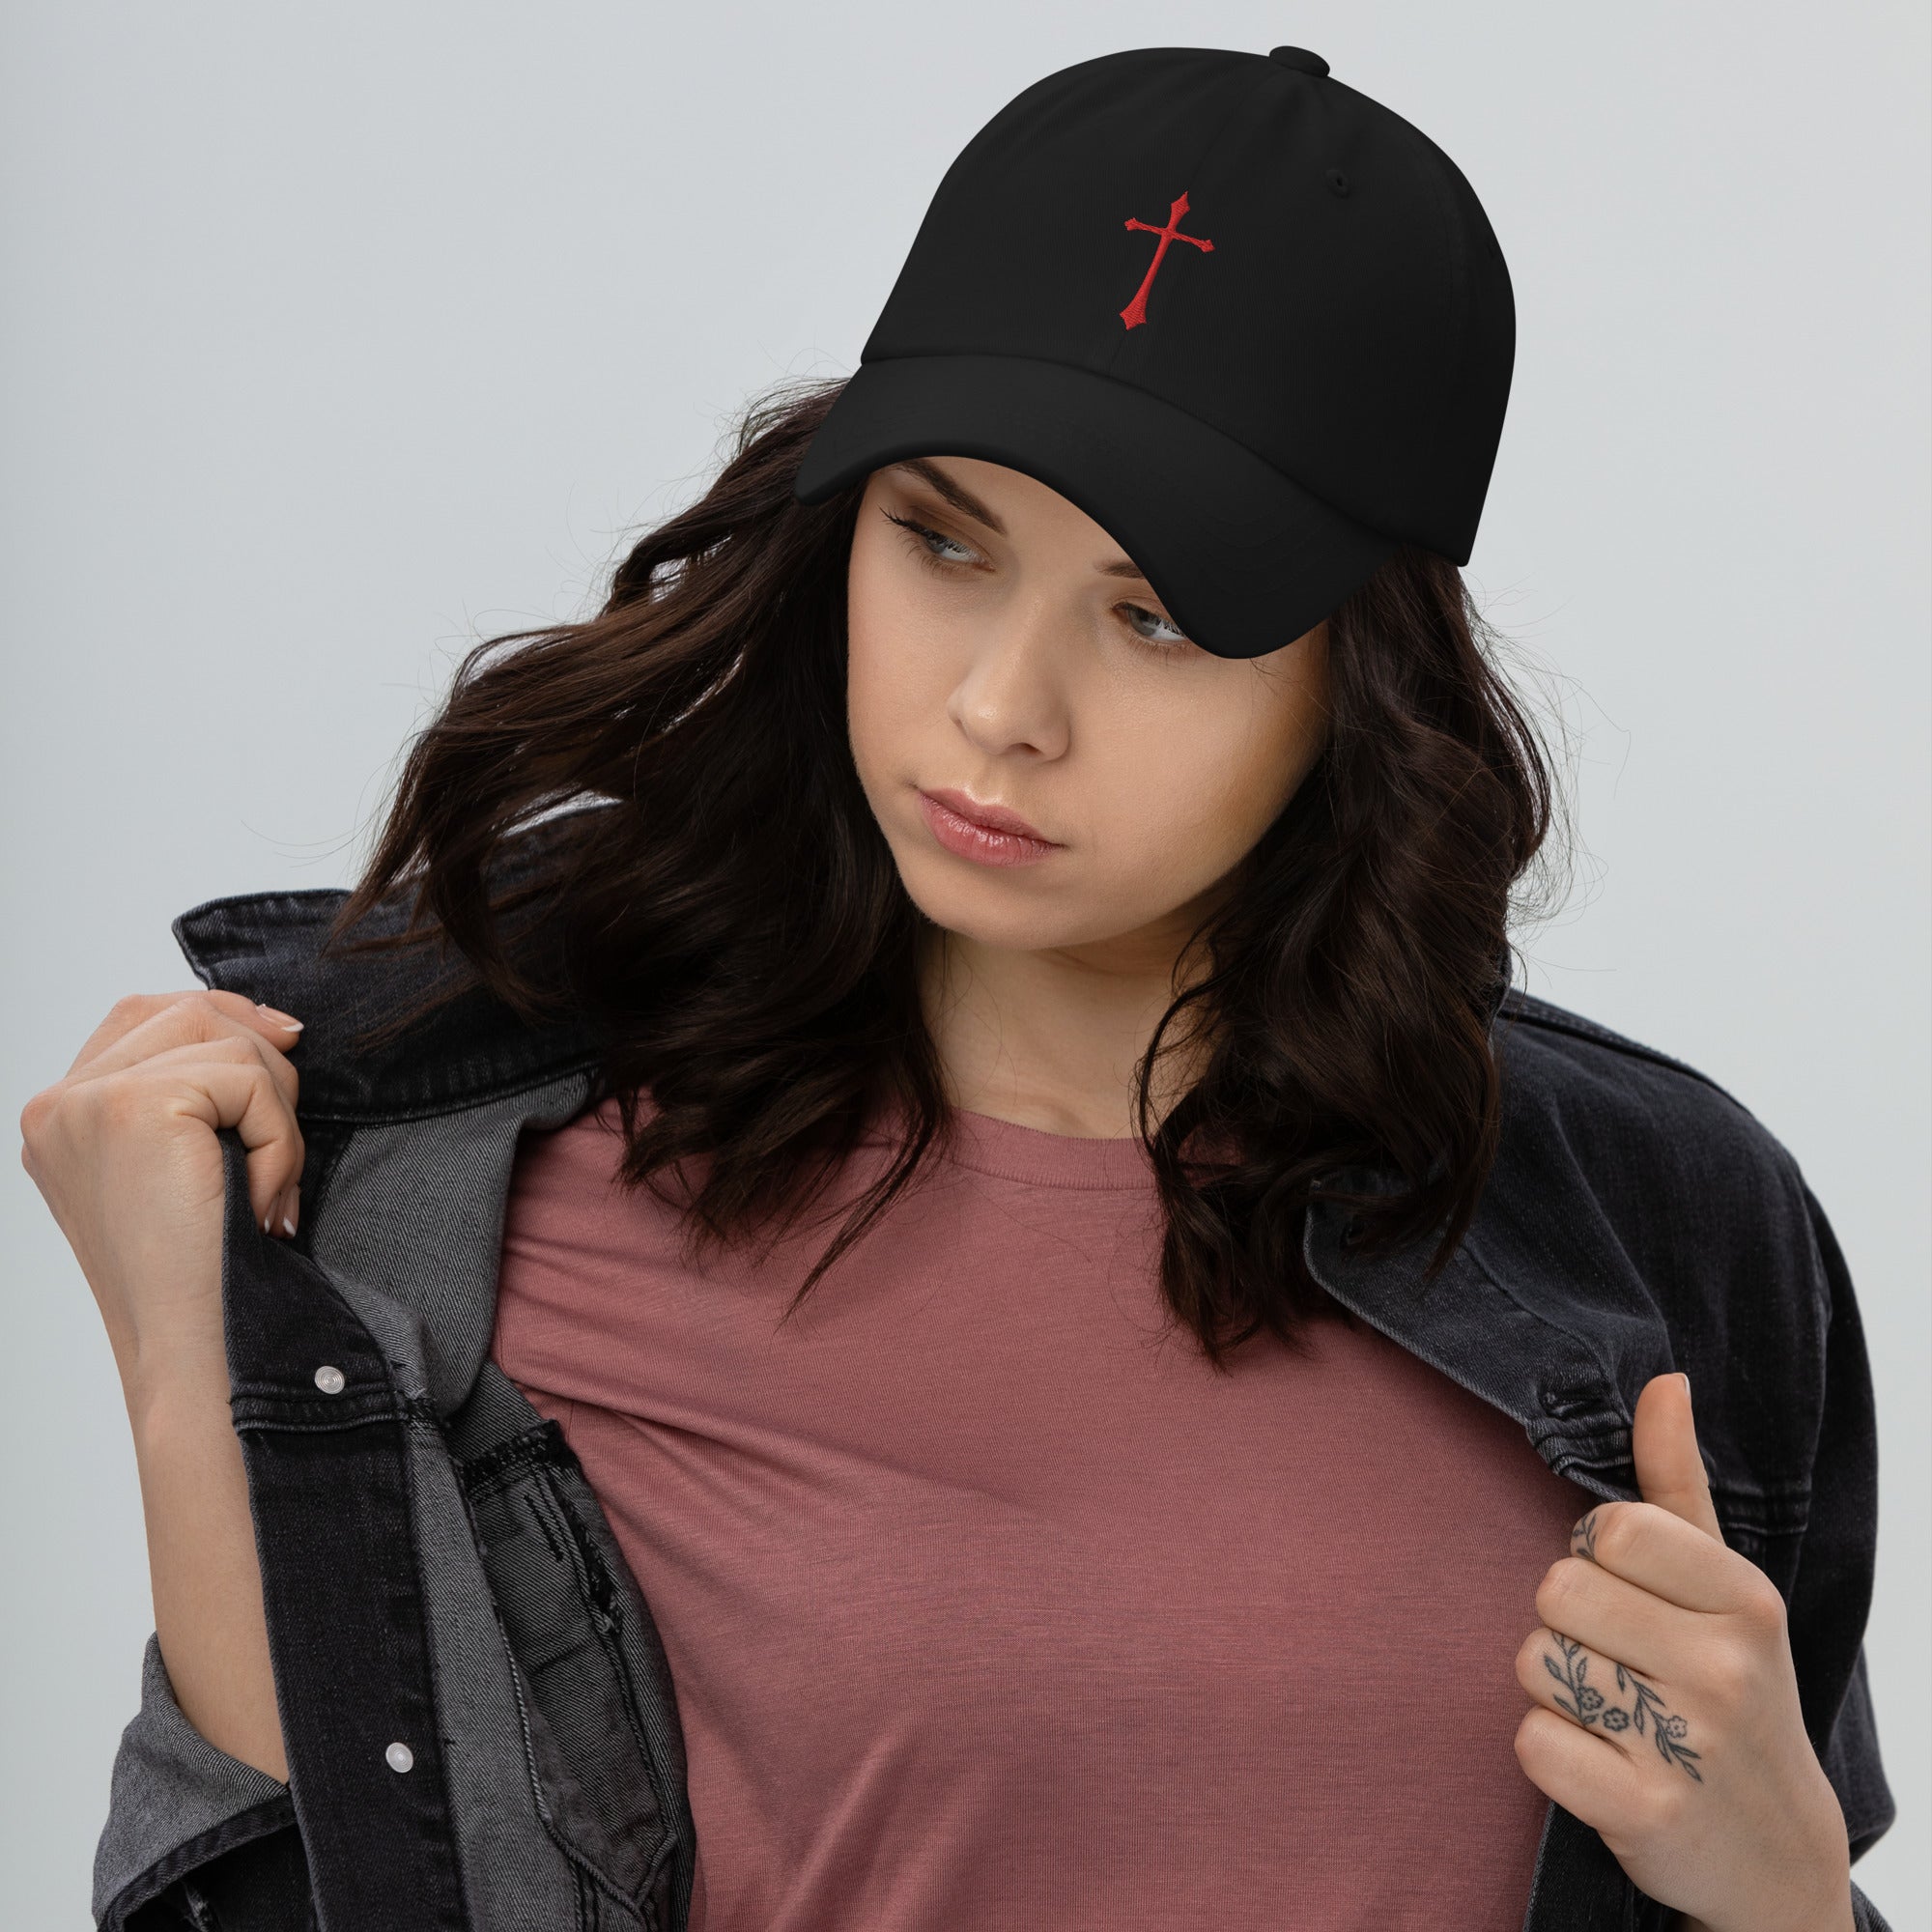 Red Gothic Ancient Medeival Cross Embroidered Baseball Cap Dad hat - Edge of Life Designs